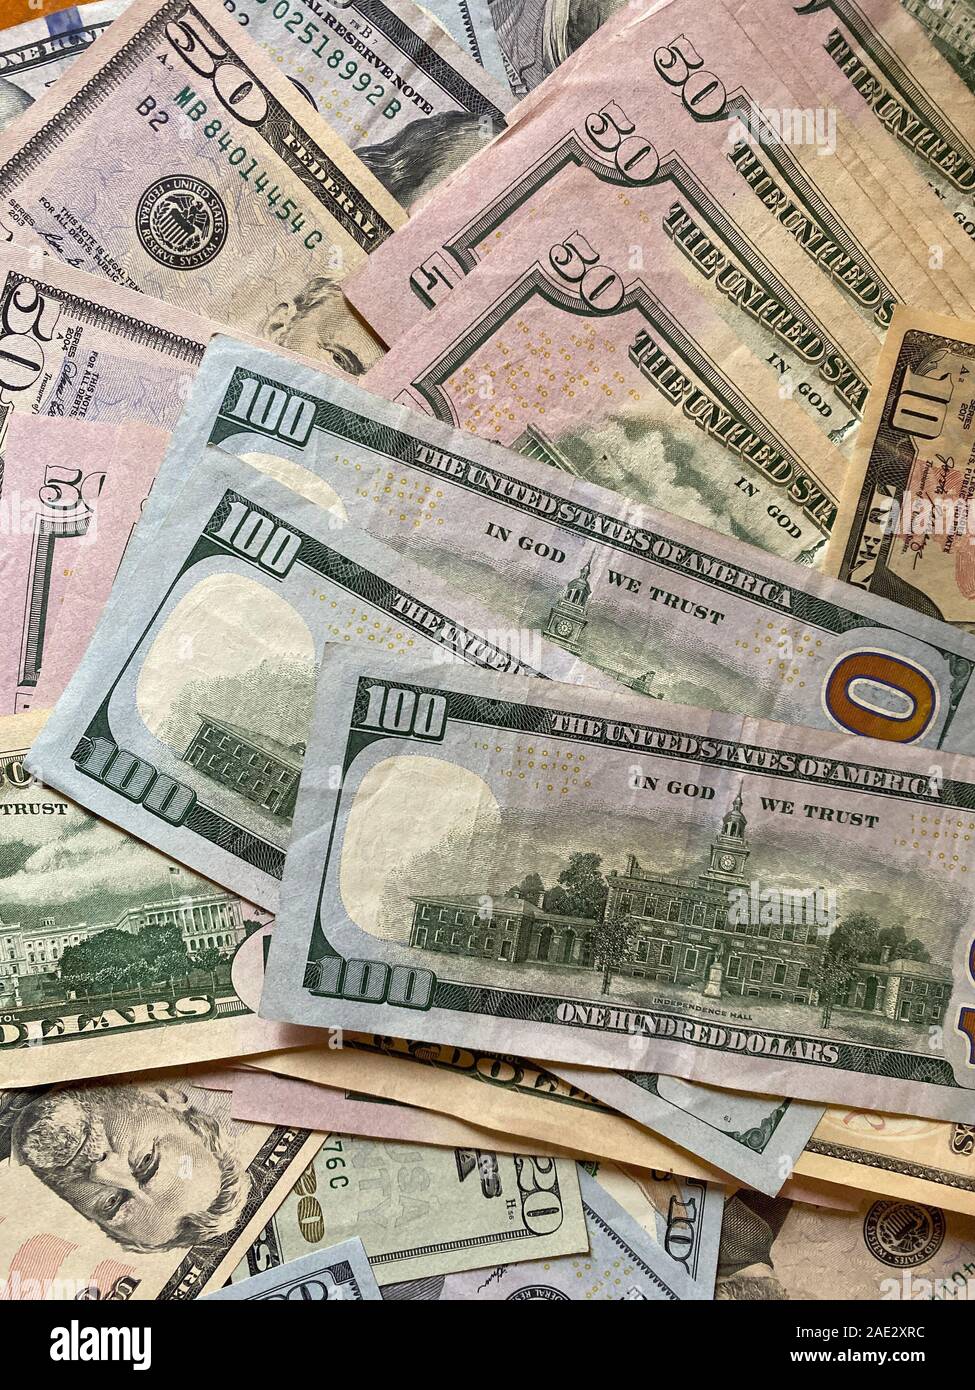 US currency denominations Stock Photo